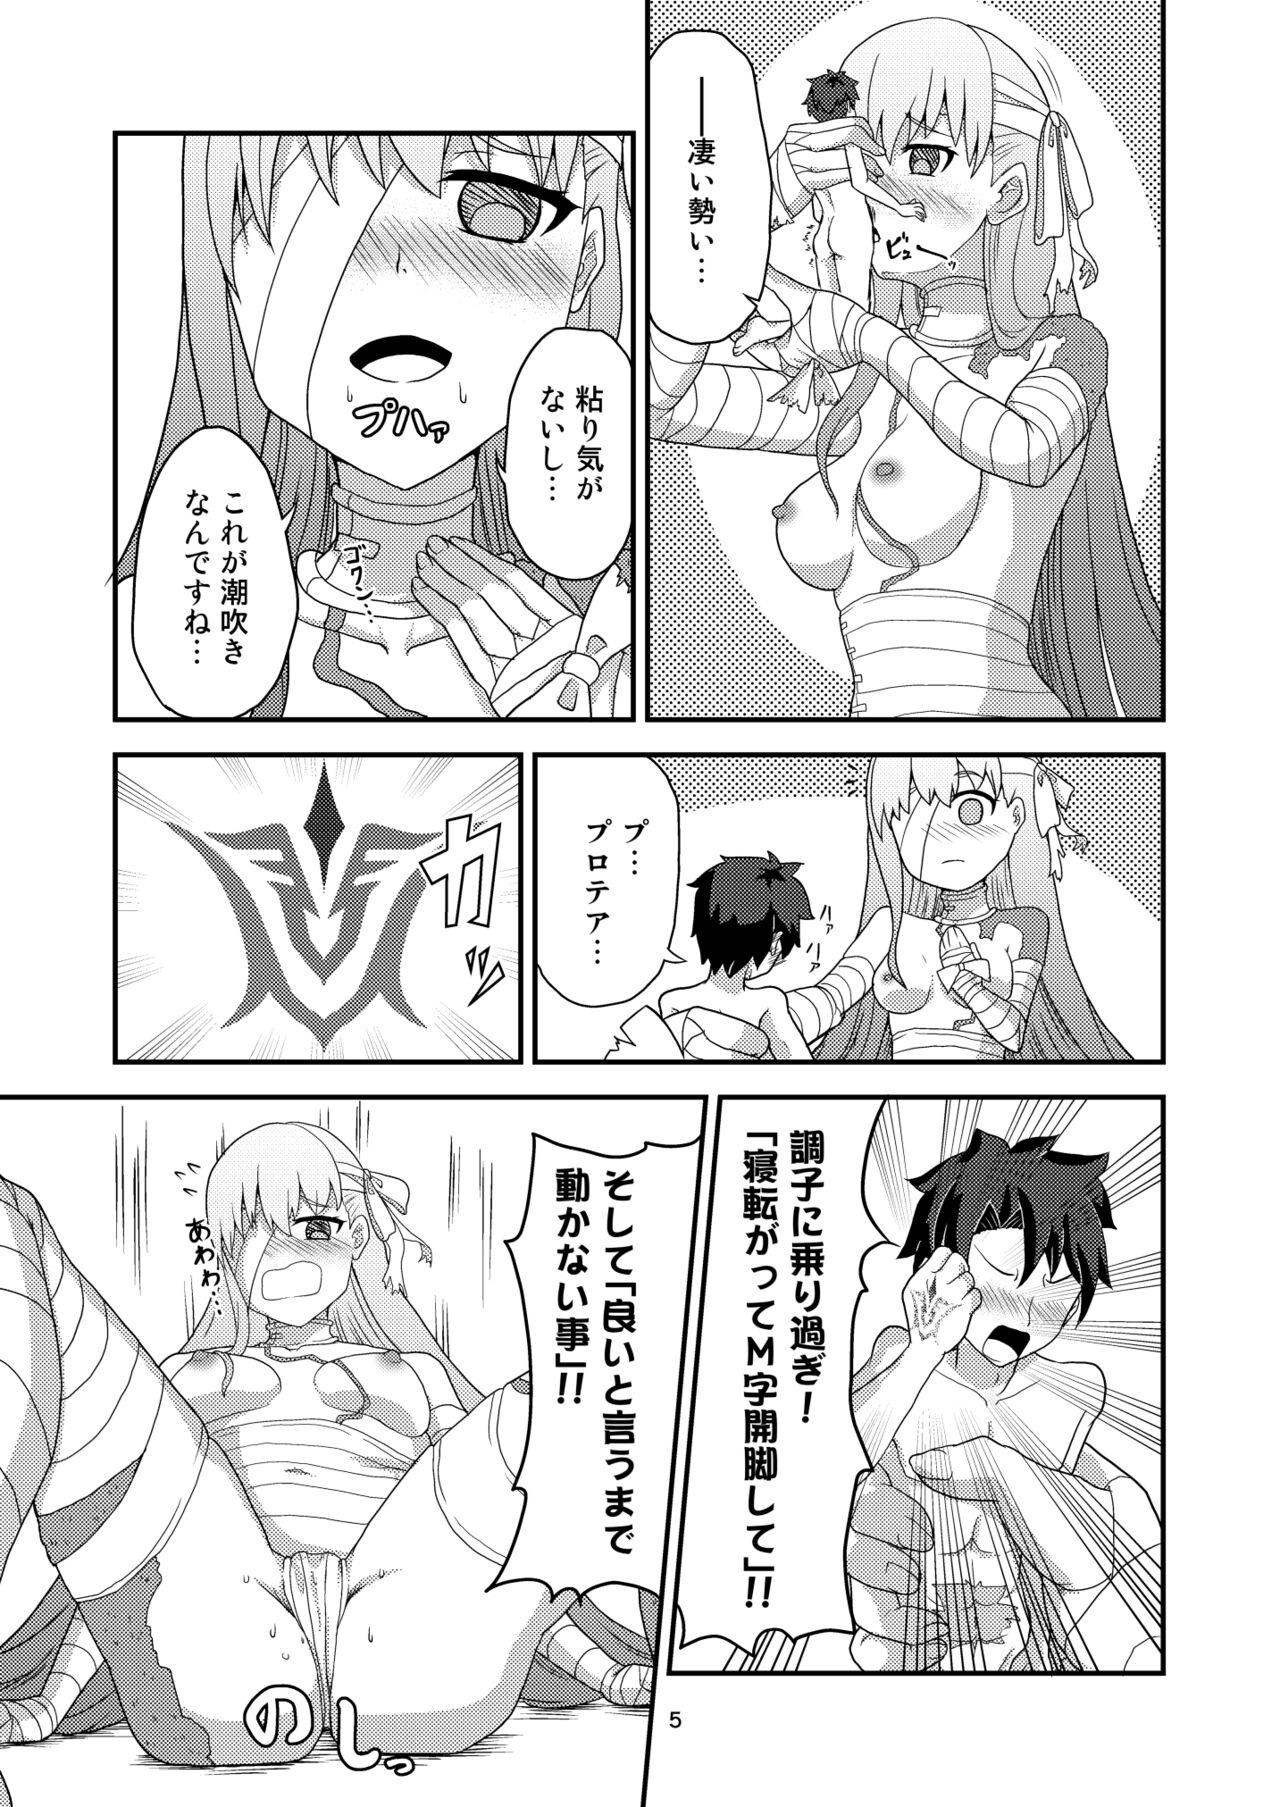 Ametuer Porn Hな私をゆるしてください - Fate grand order Toy - Page 6